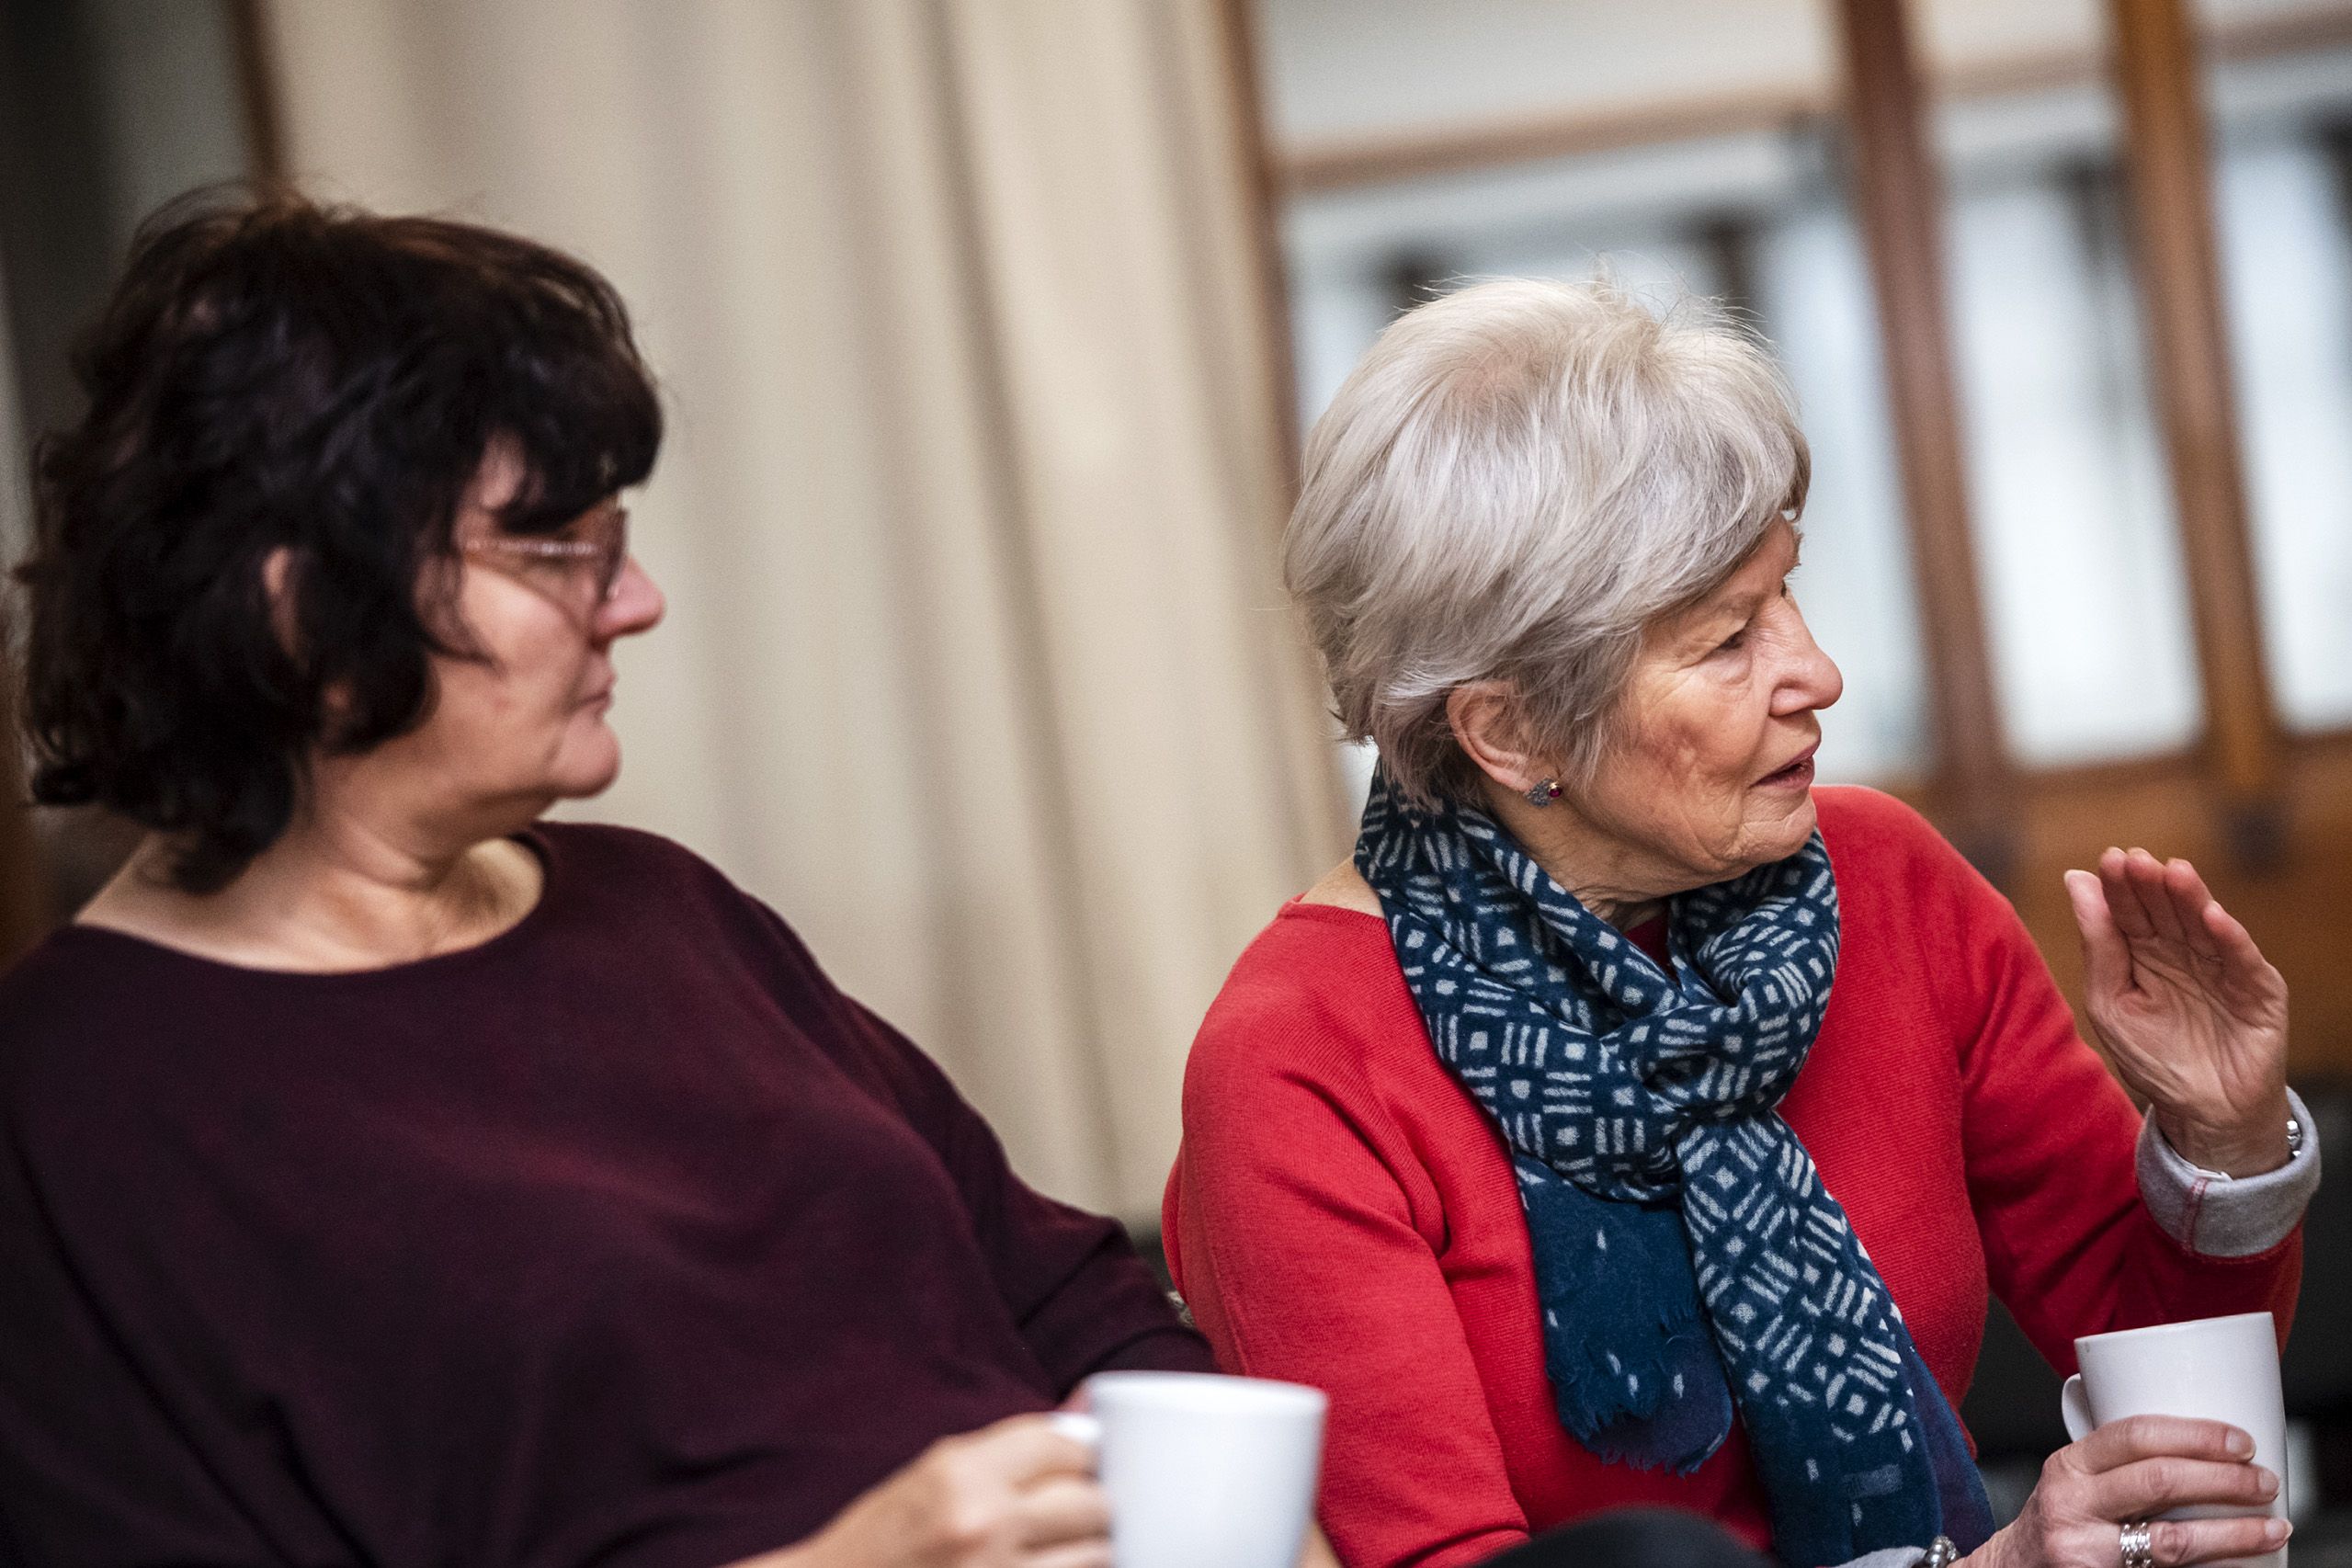 Caroline Mockford, of Govan a neighborhood of Glasglow, left, listens as Sandra Carter, of Edinburgh, speaks during the monthly Poverty Truth Community meeting at The Pyramid at Anderston. Image by Michael Santiago. United Kingdom, 2019.